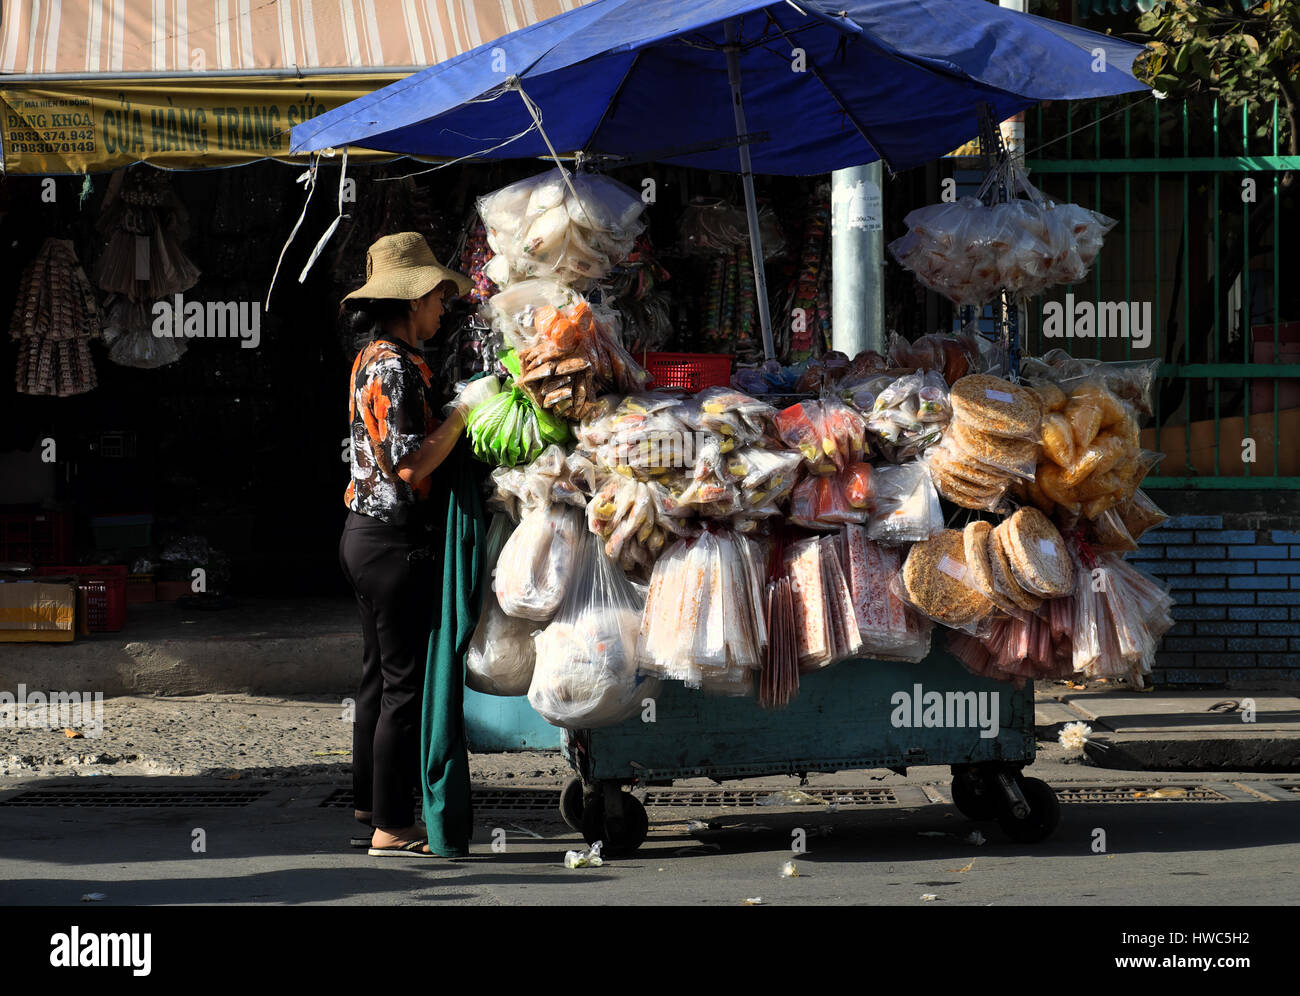 HO CHI MINH CITY, VIET NAM- MARCH 18, 2017: Vietnamese street food at Cho Lon market, street vendor earn money with many kind of rice paper in push ca Stock Photo